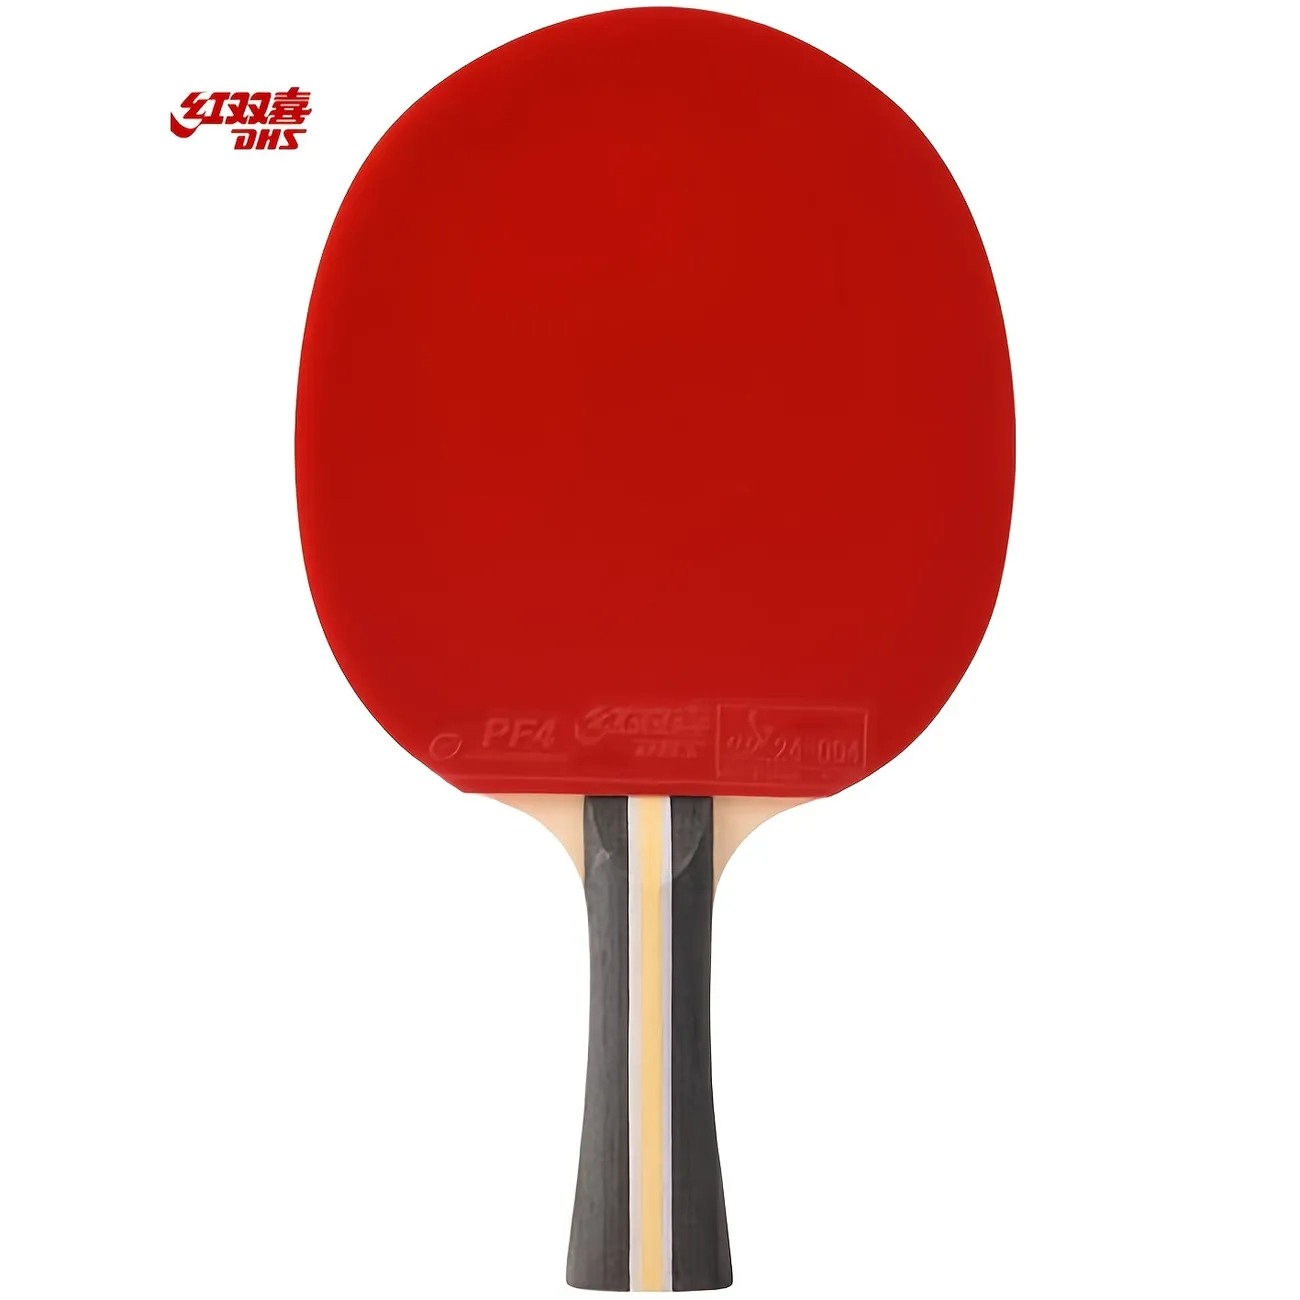 Compete At Your Best Dhs Ping Pong Racquet H3002 - Double Sided Reverse Rubber Table Tennis Racket